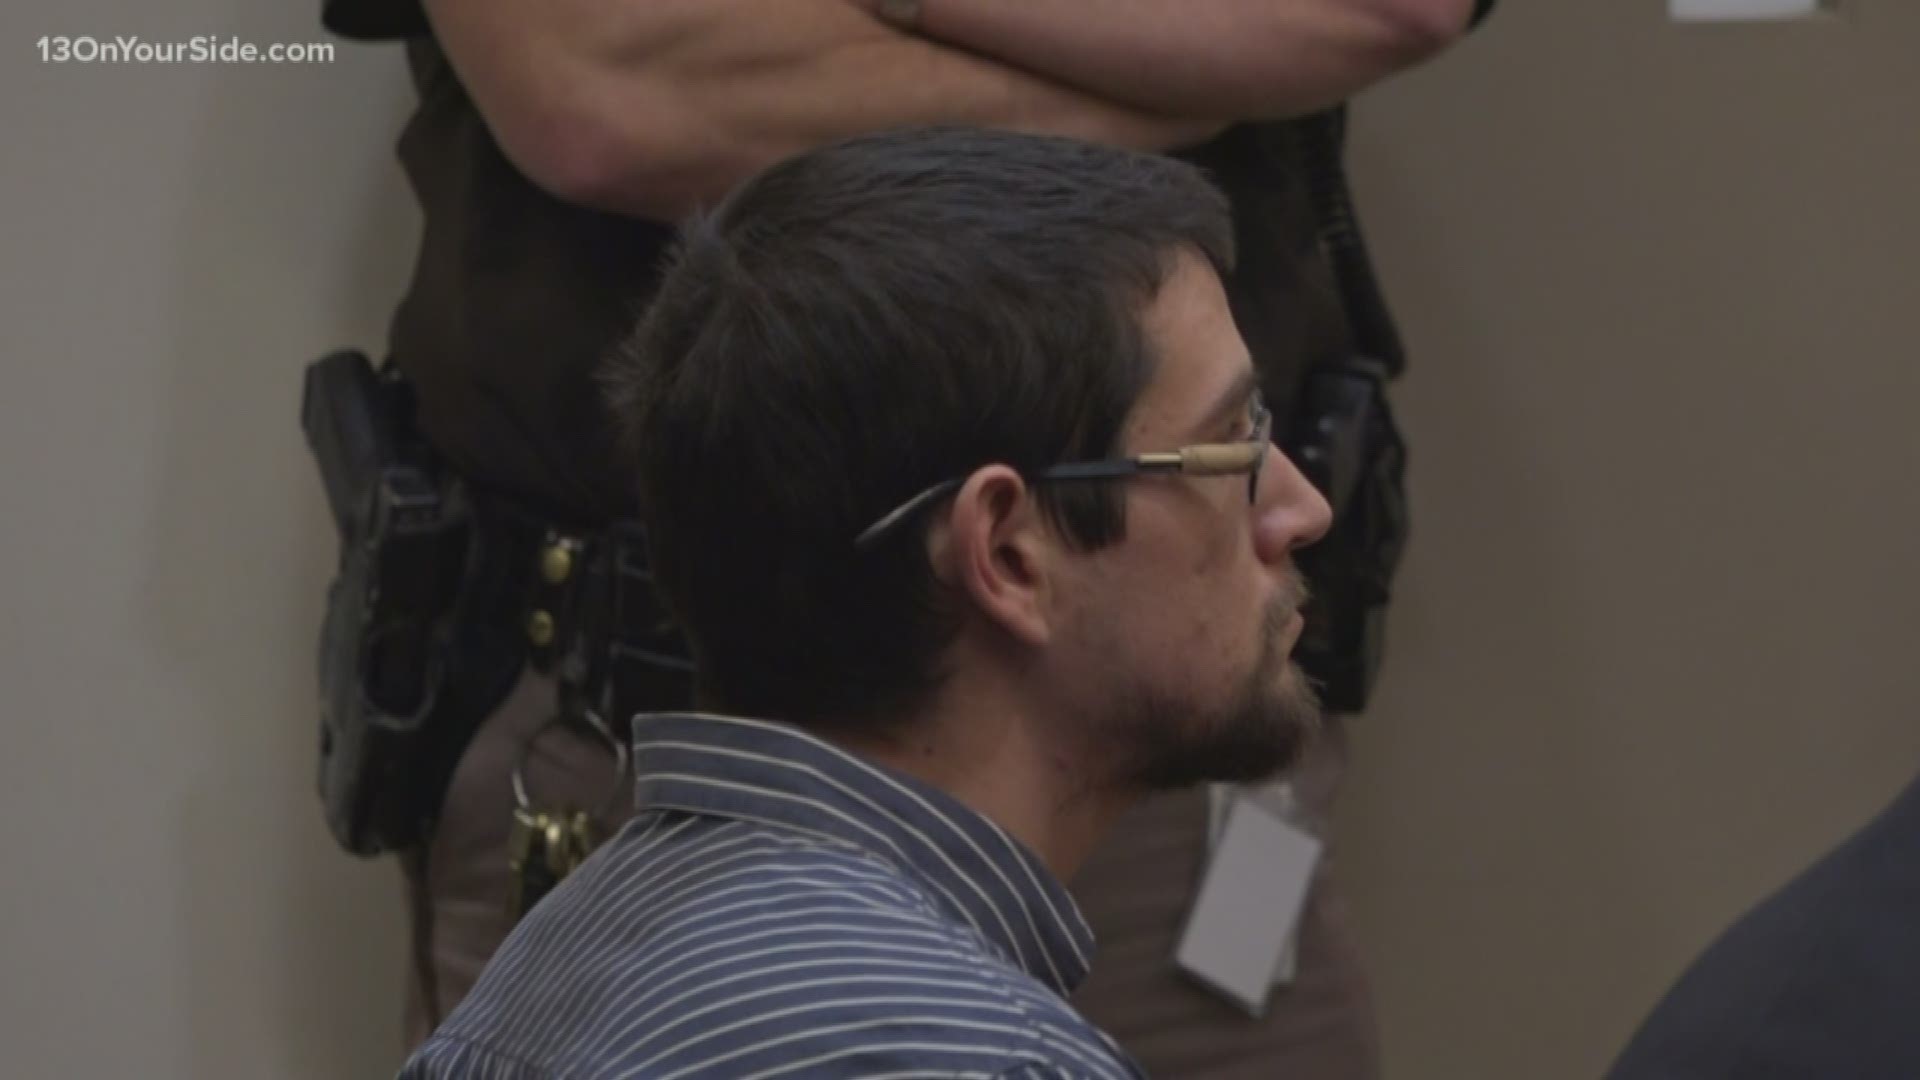 Seth Welch faces felony murder and first-degree child abuse charges in the death of his infant daughter Mary.